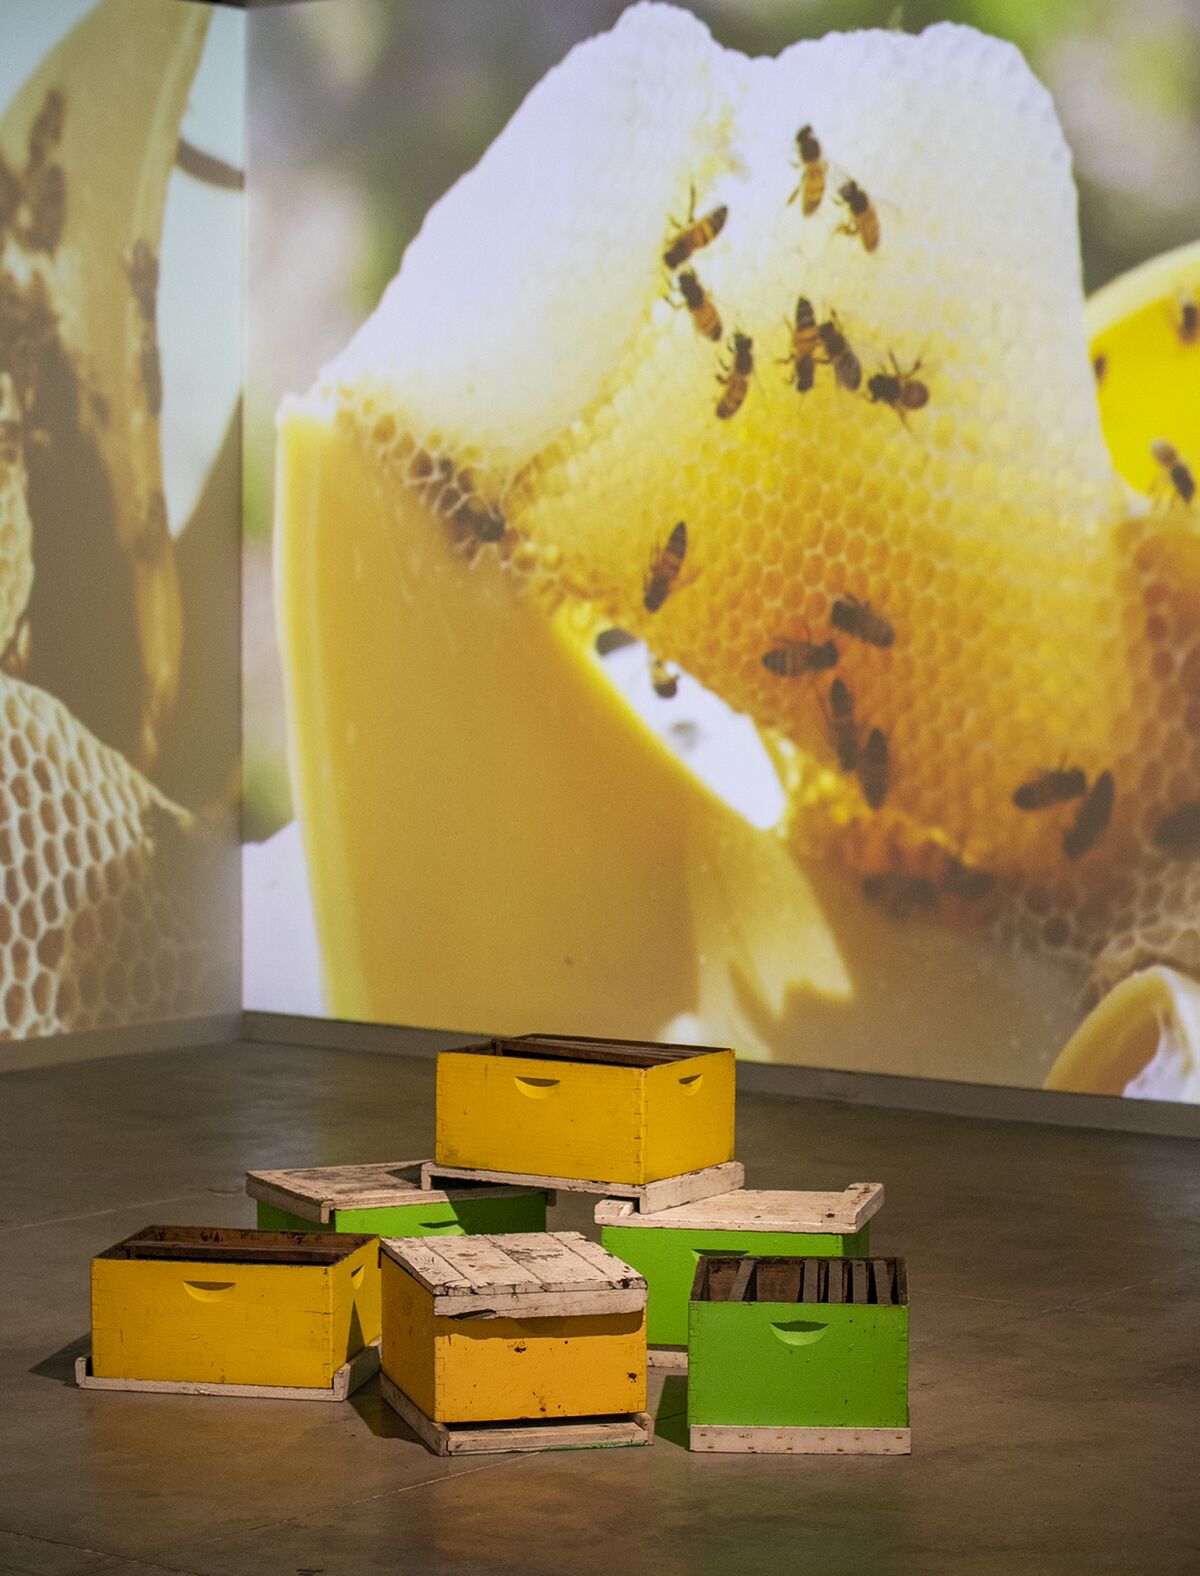 Bee hives and a video are part of "With Honey in the Mouth — Con Miel en la Boca."